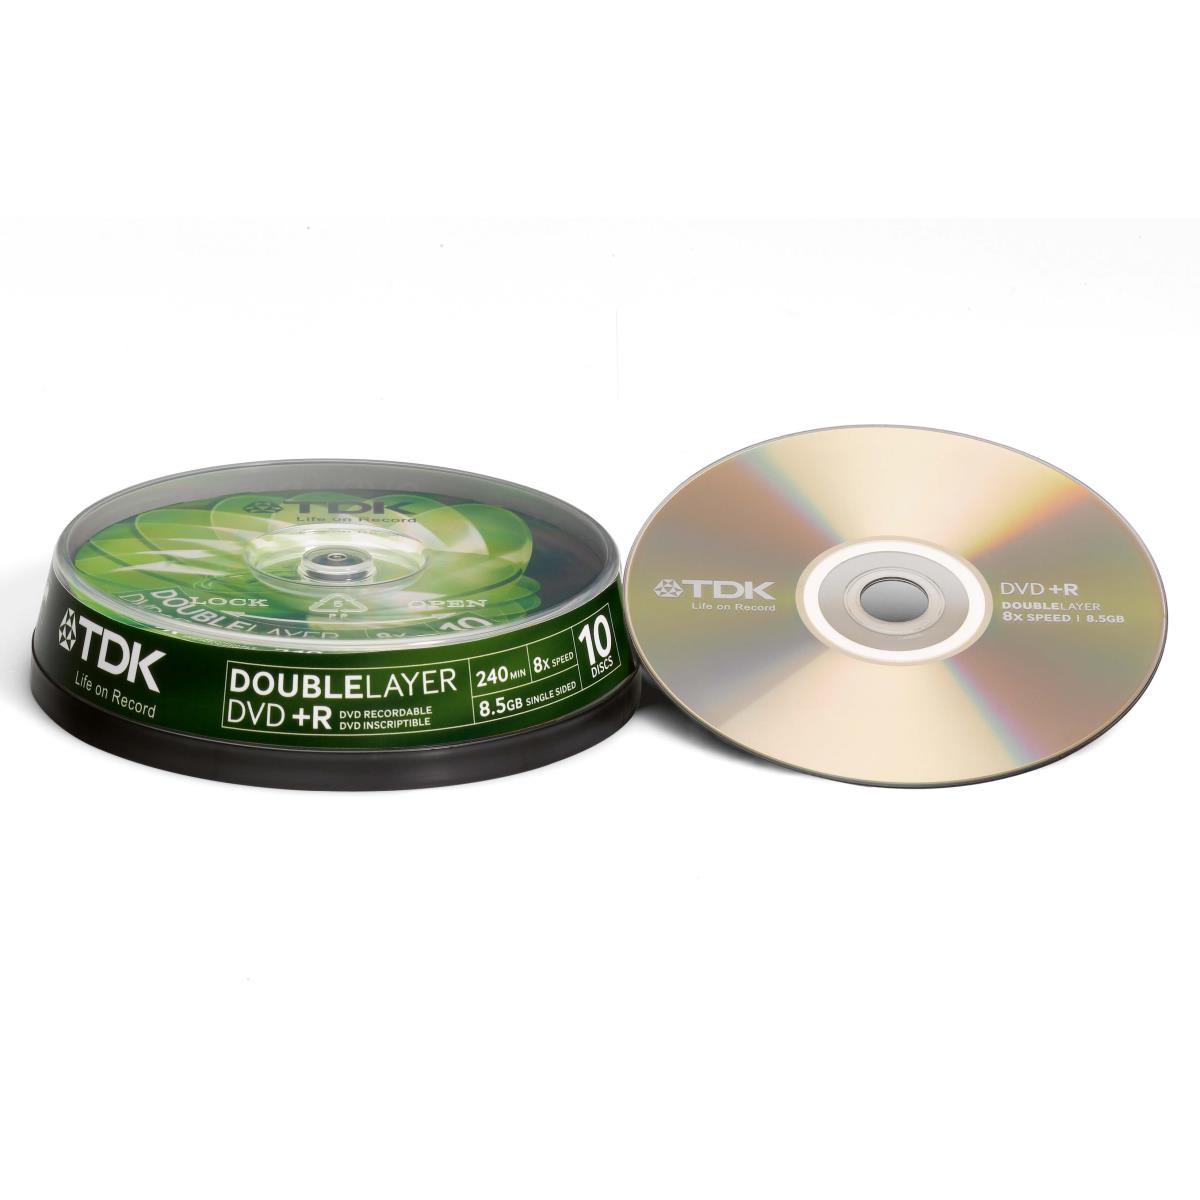 Philips - Cakebox 10 Dvd+R Vierge Double Couche 8,5Gb - 240Min - 8X